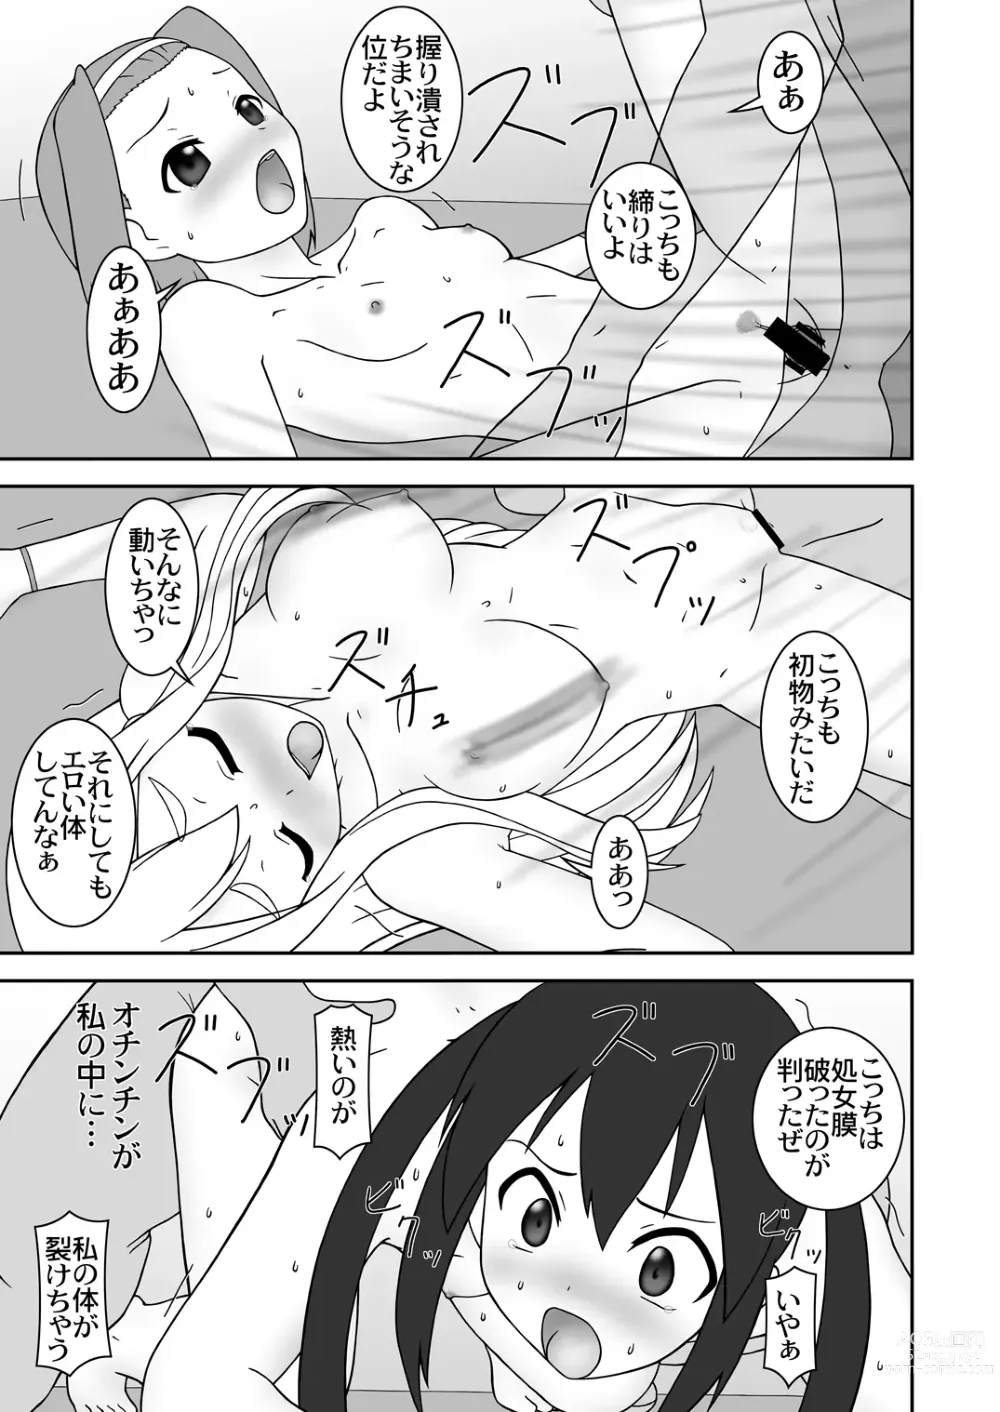 Page 10 of doujinshi OPEN AIR